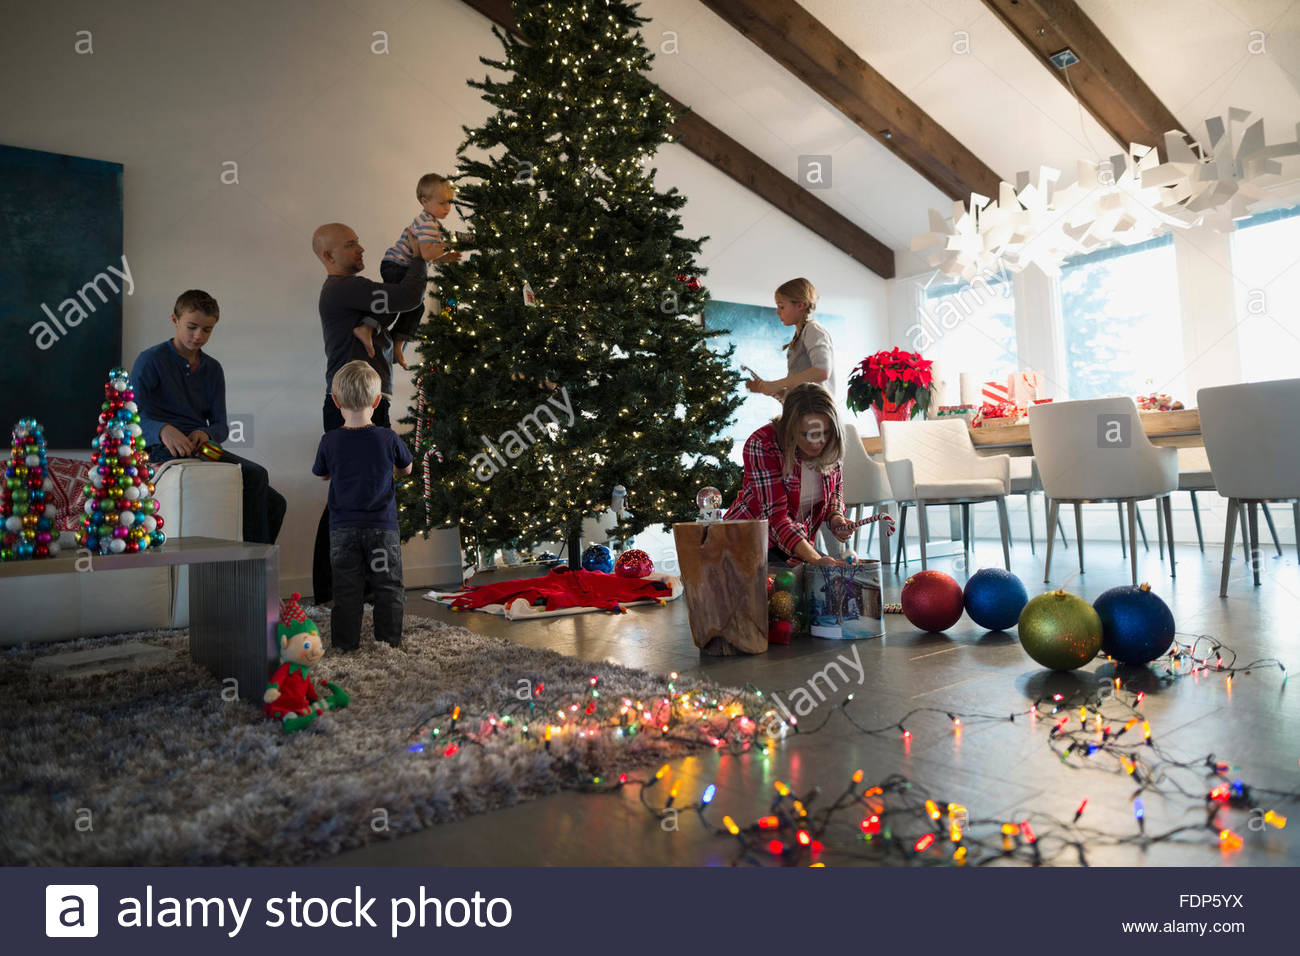 Family decorating Christmas tree in living room Stock Photo